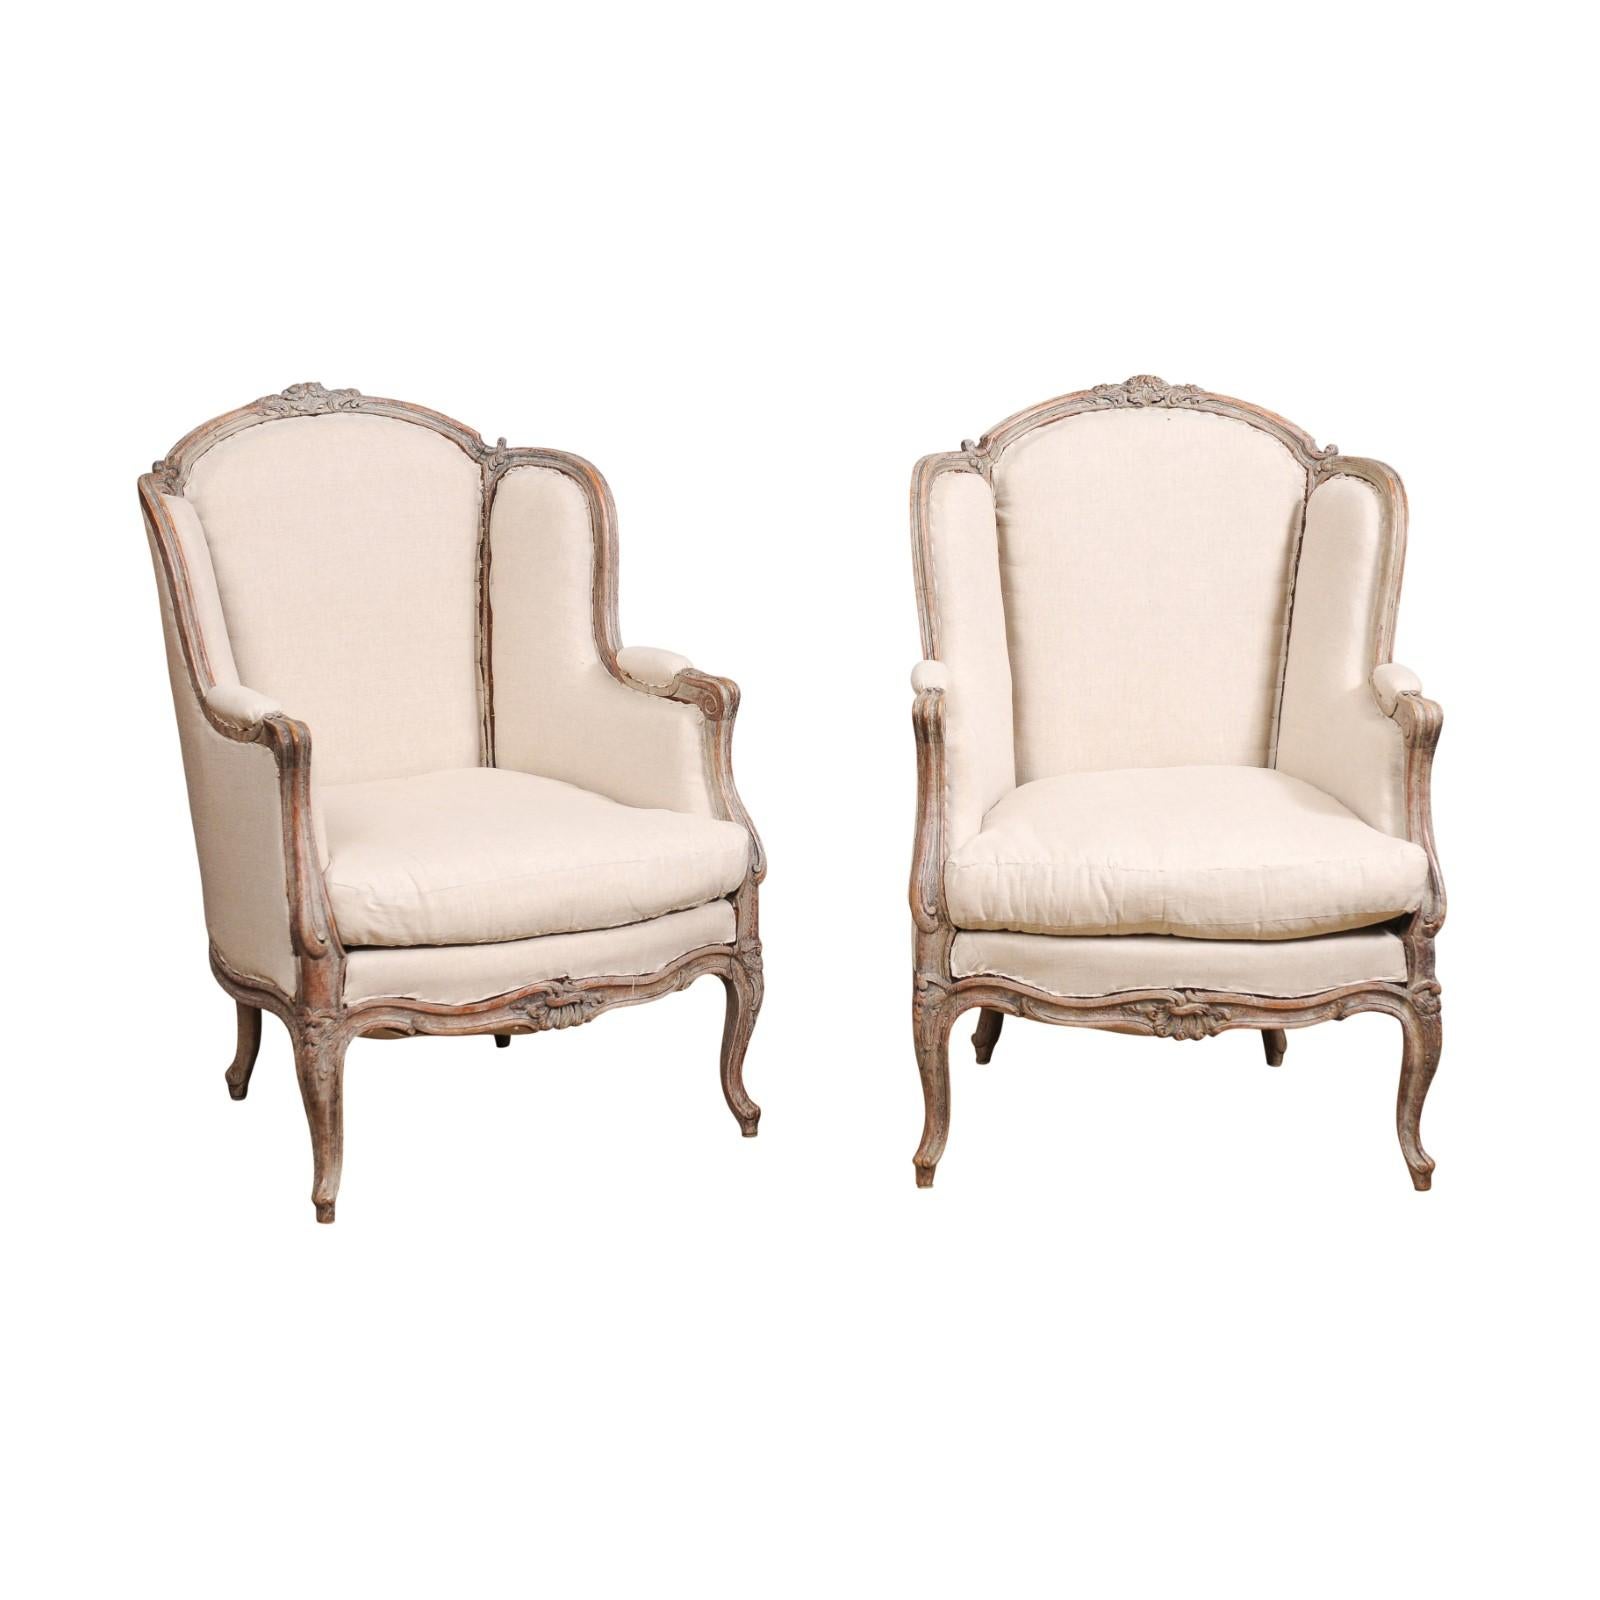 A pair of French Louis XV style painted wood bergères à oreilles chairs from circa 1880 with carved floral motifs, cabriole legs and used upholstery. This exquisite pair of French Louis XV style bergères à oreilles, dating back to circa 1880,